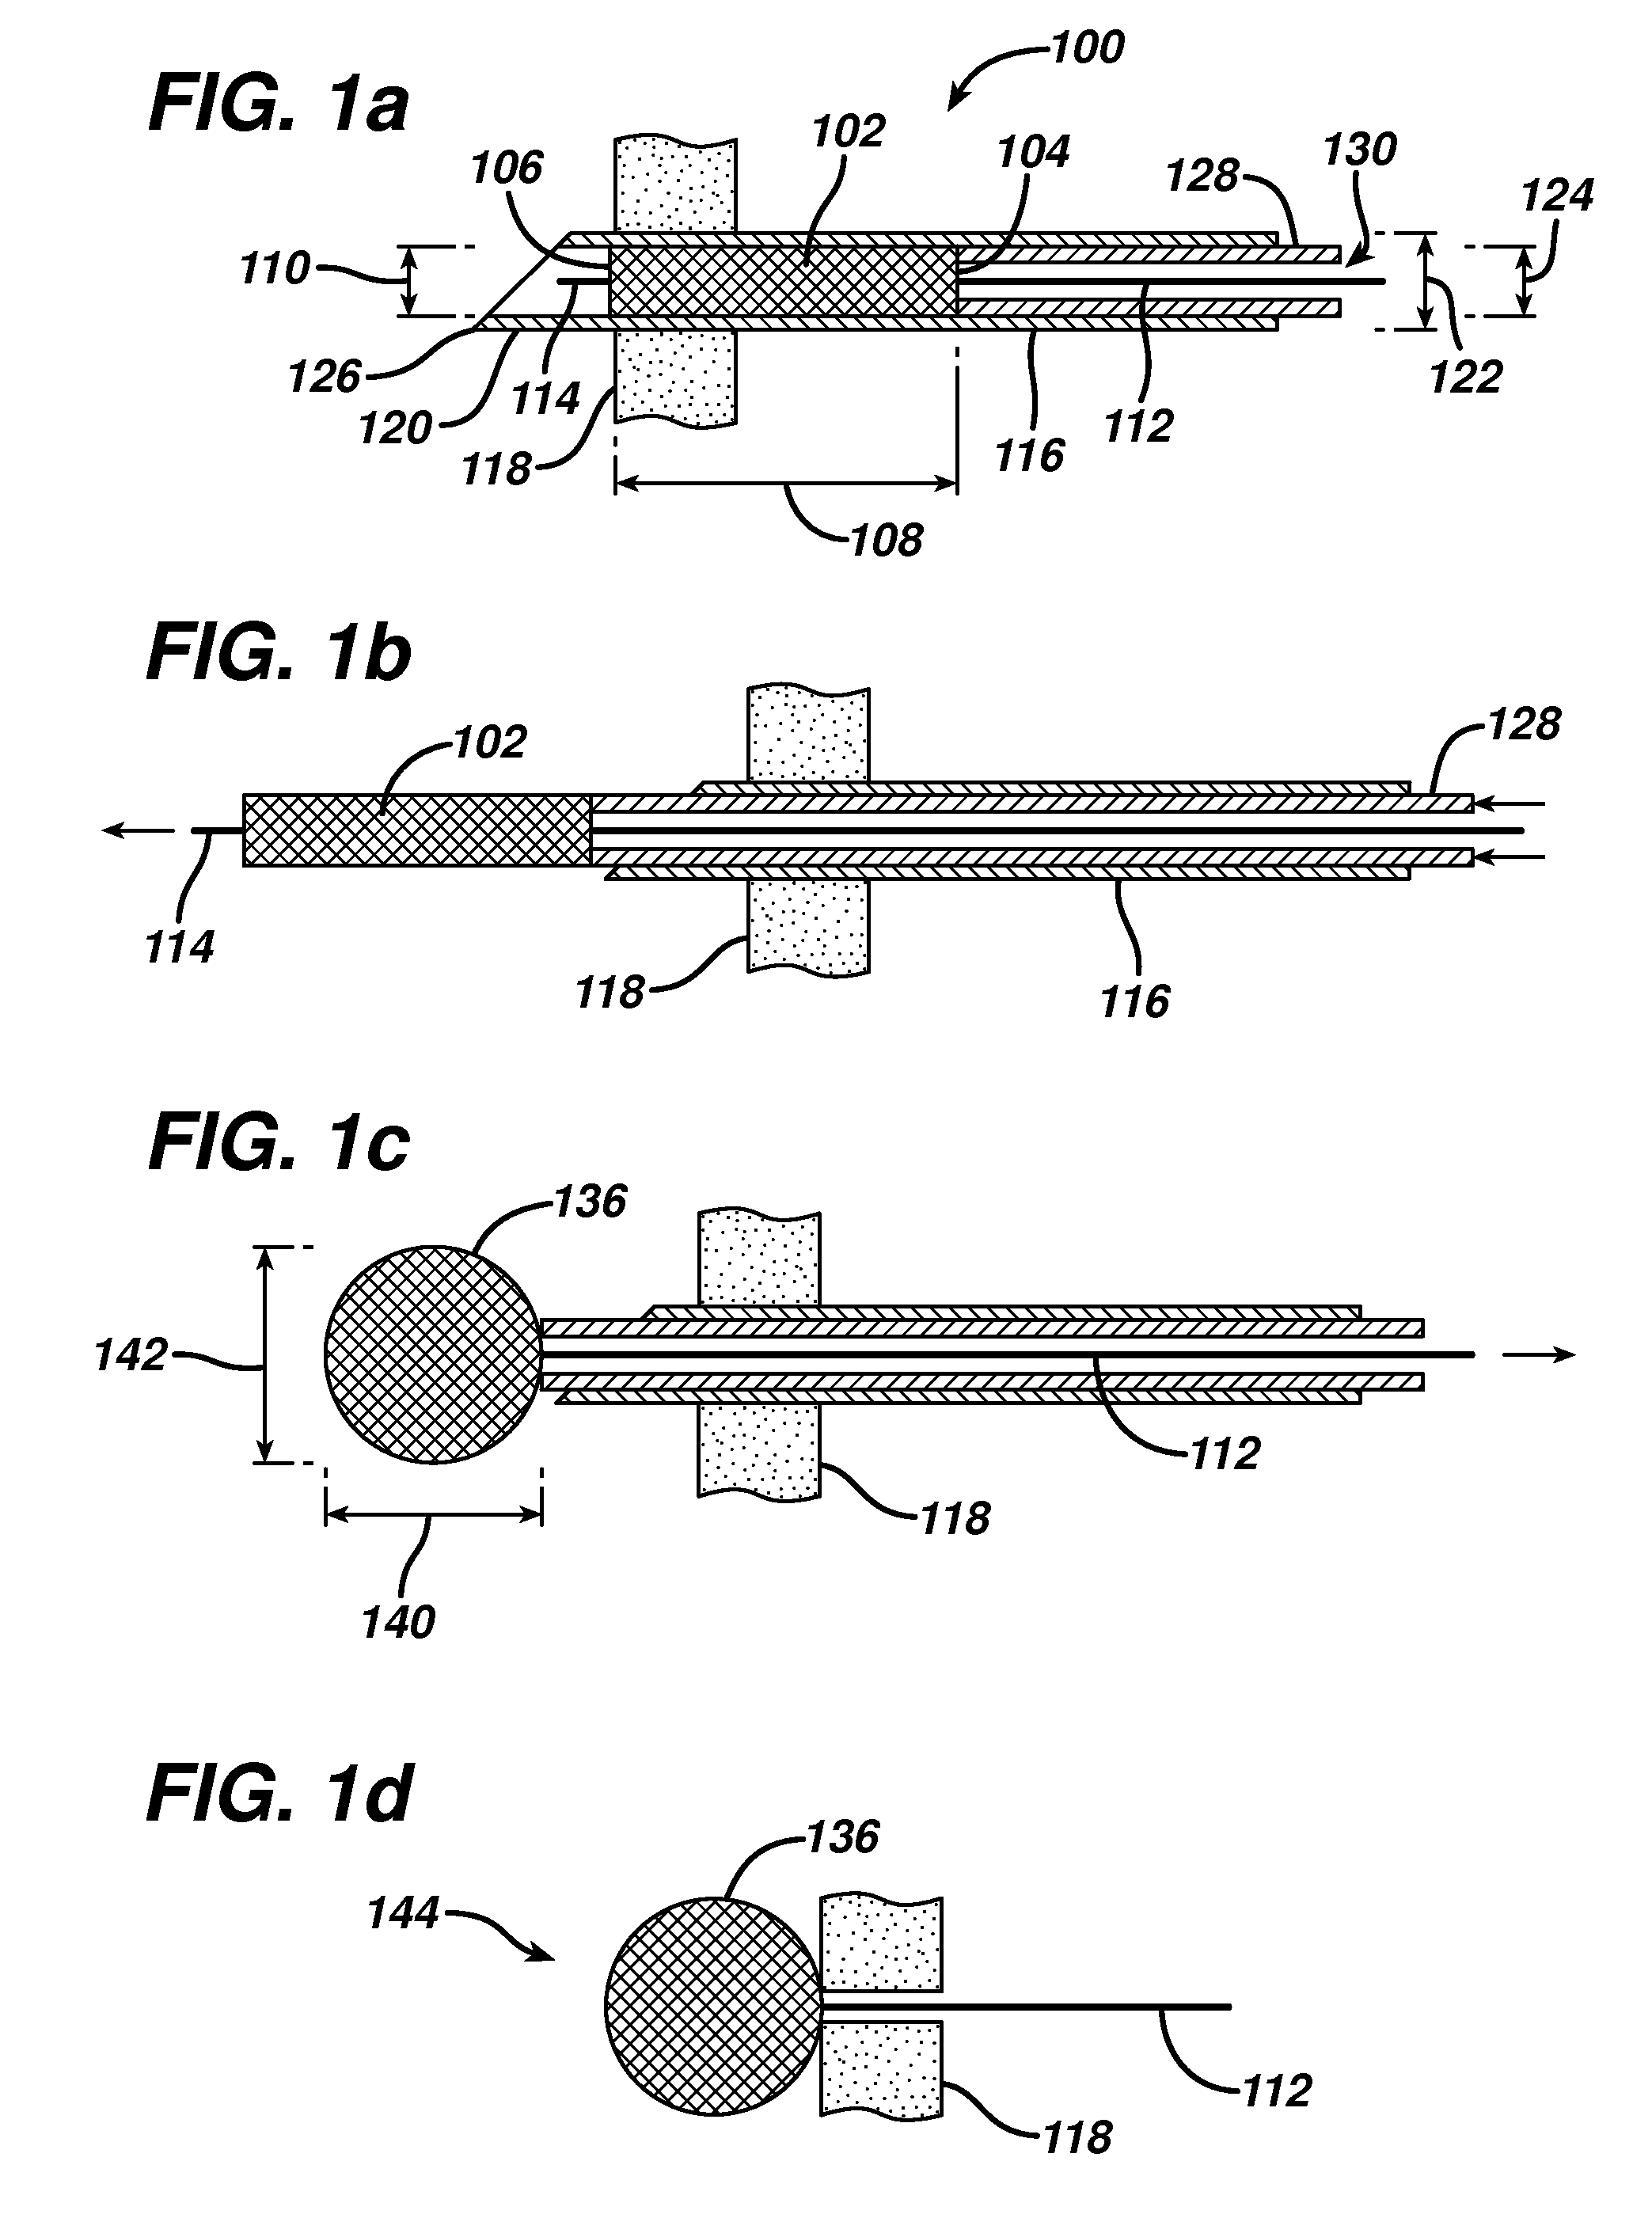 Methods and devices for repairing meniscal tissue